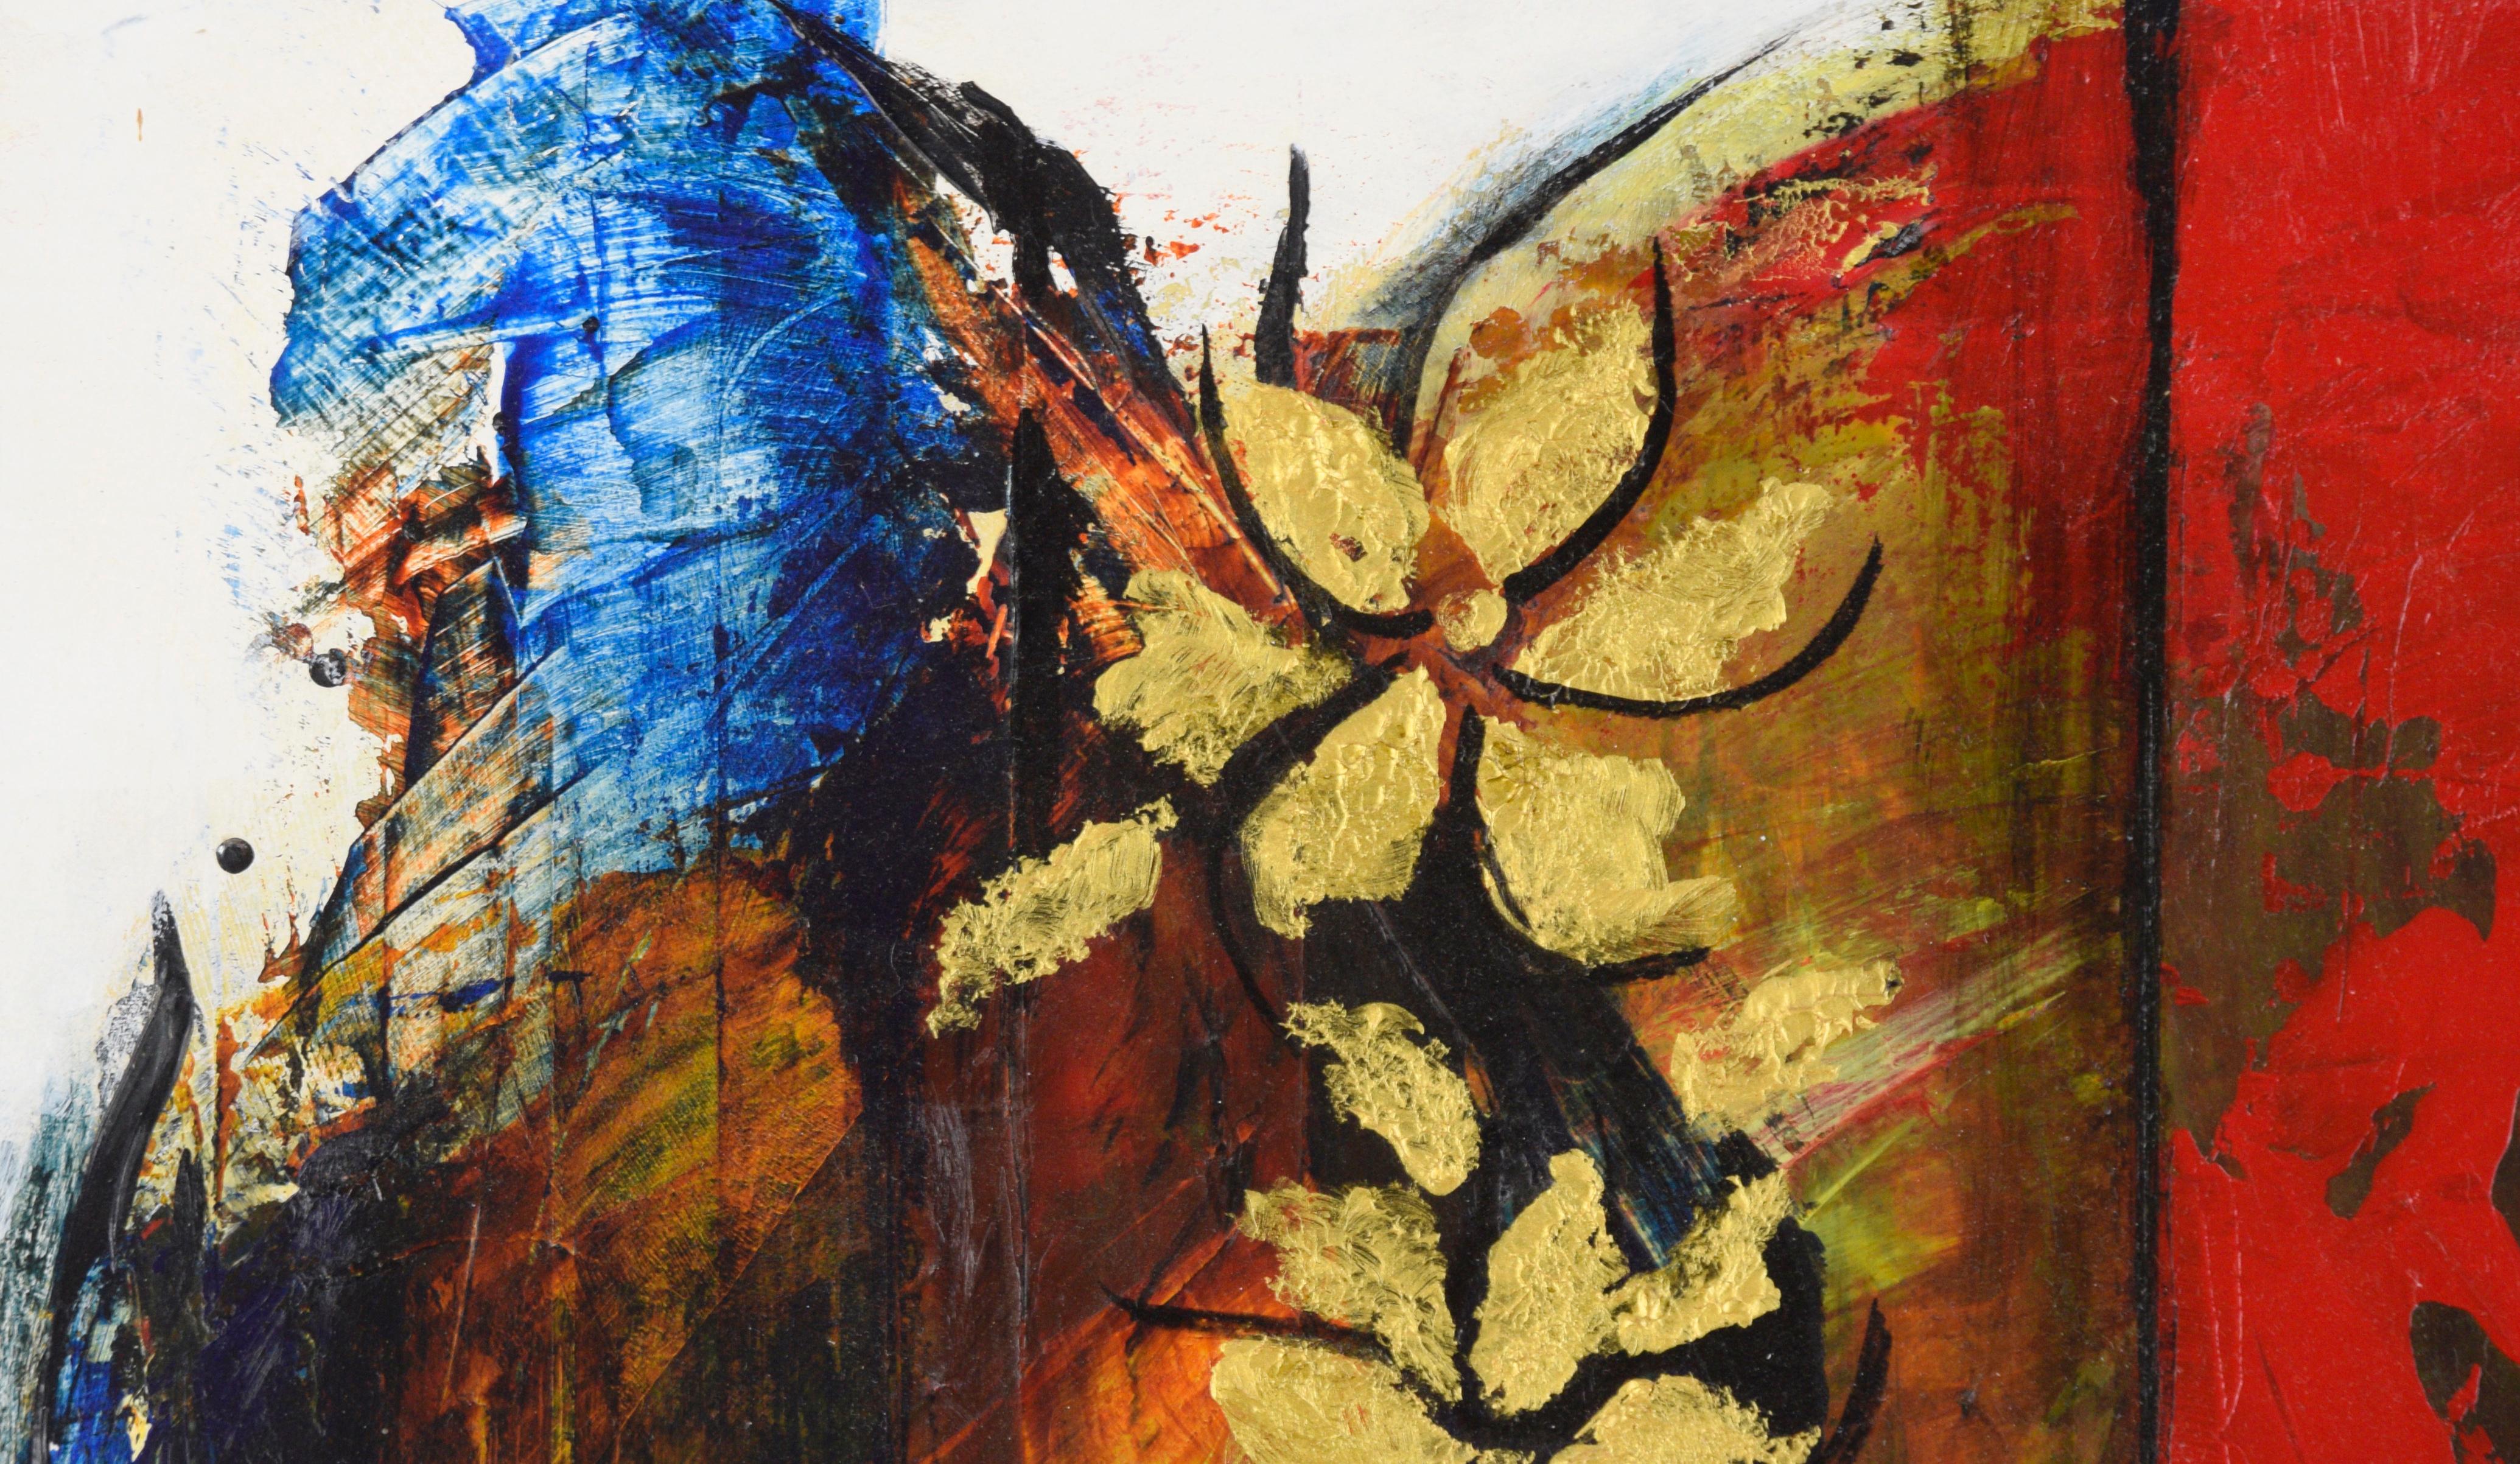 Golden Flowers #2 - Abstract Expressionist - Painting by Renata Rosa